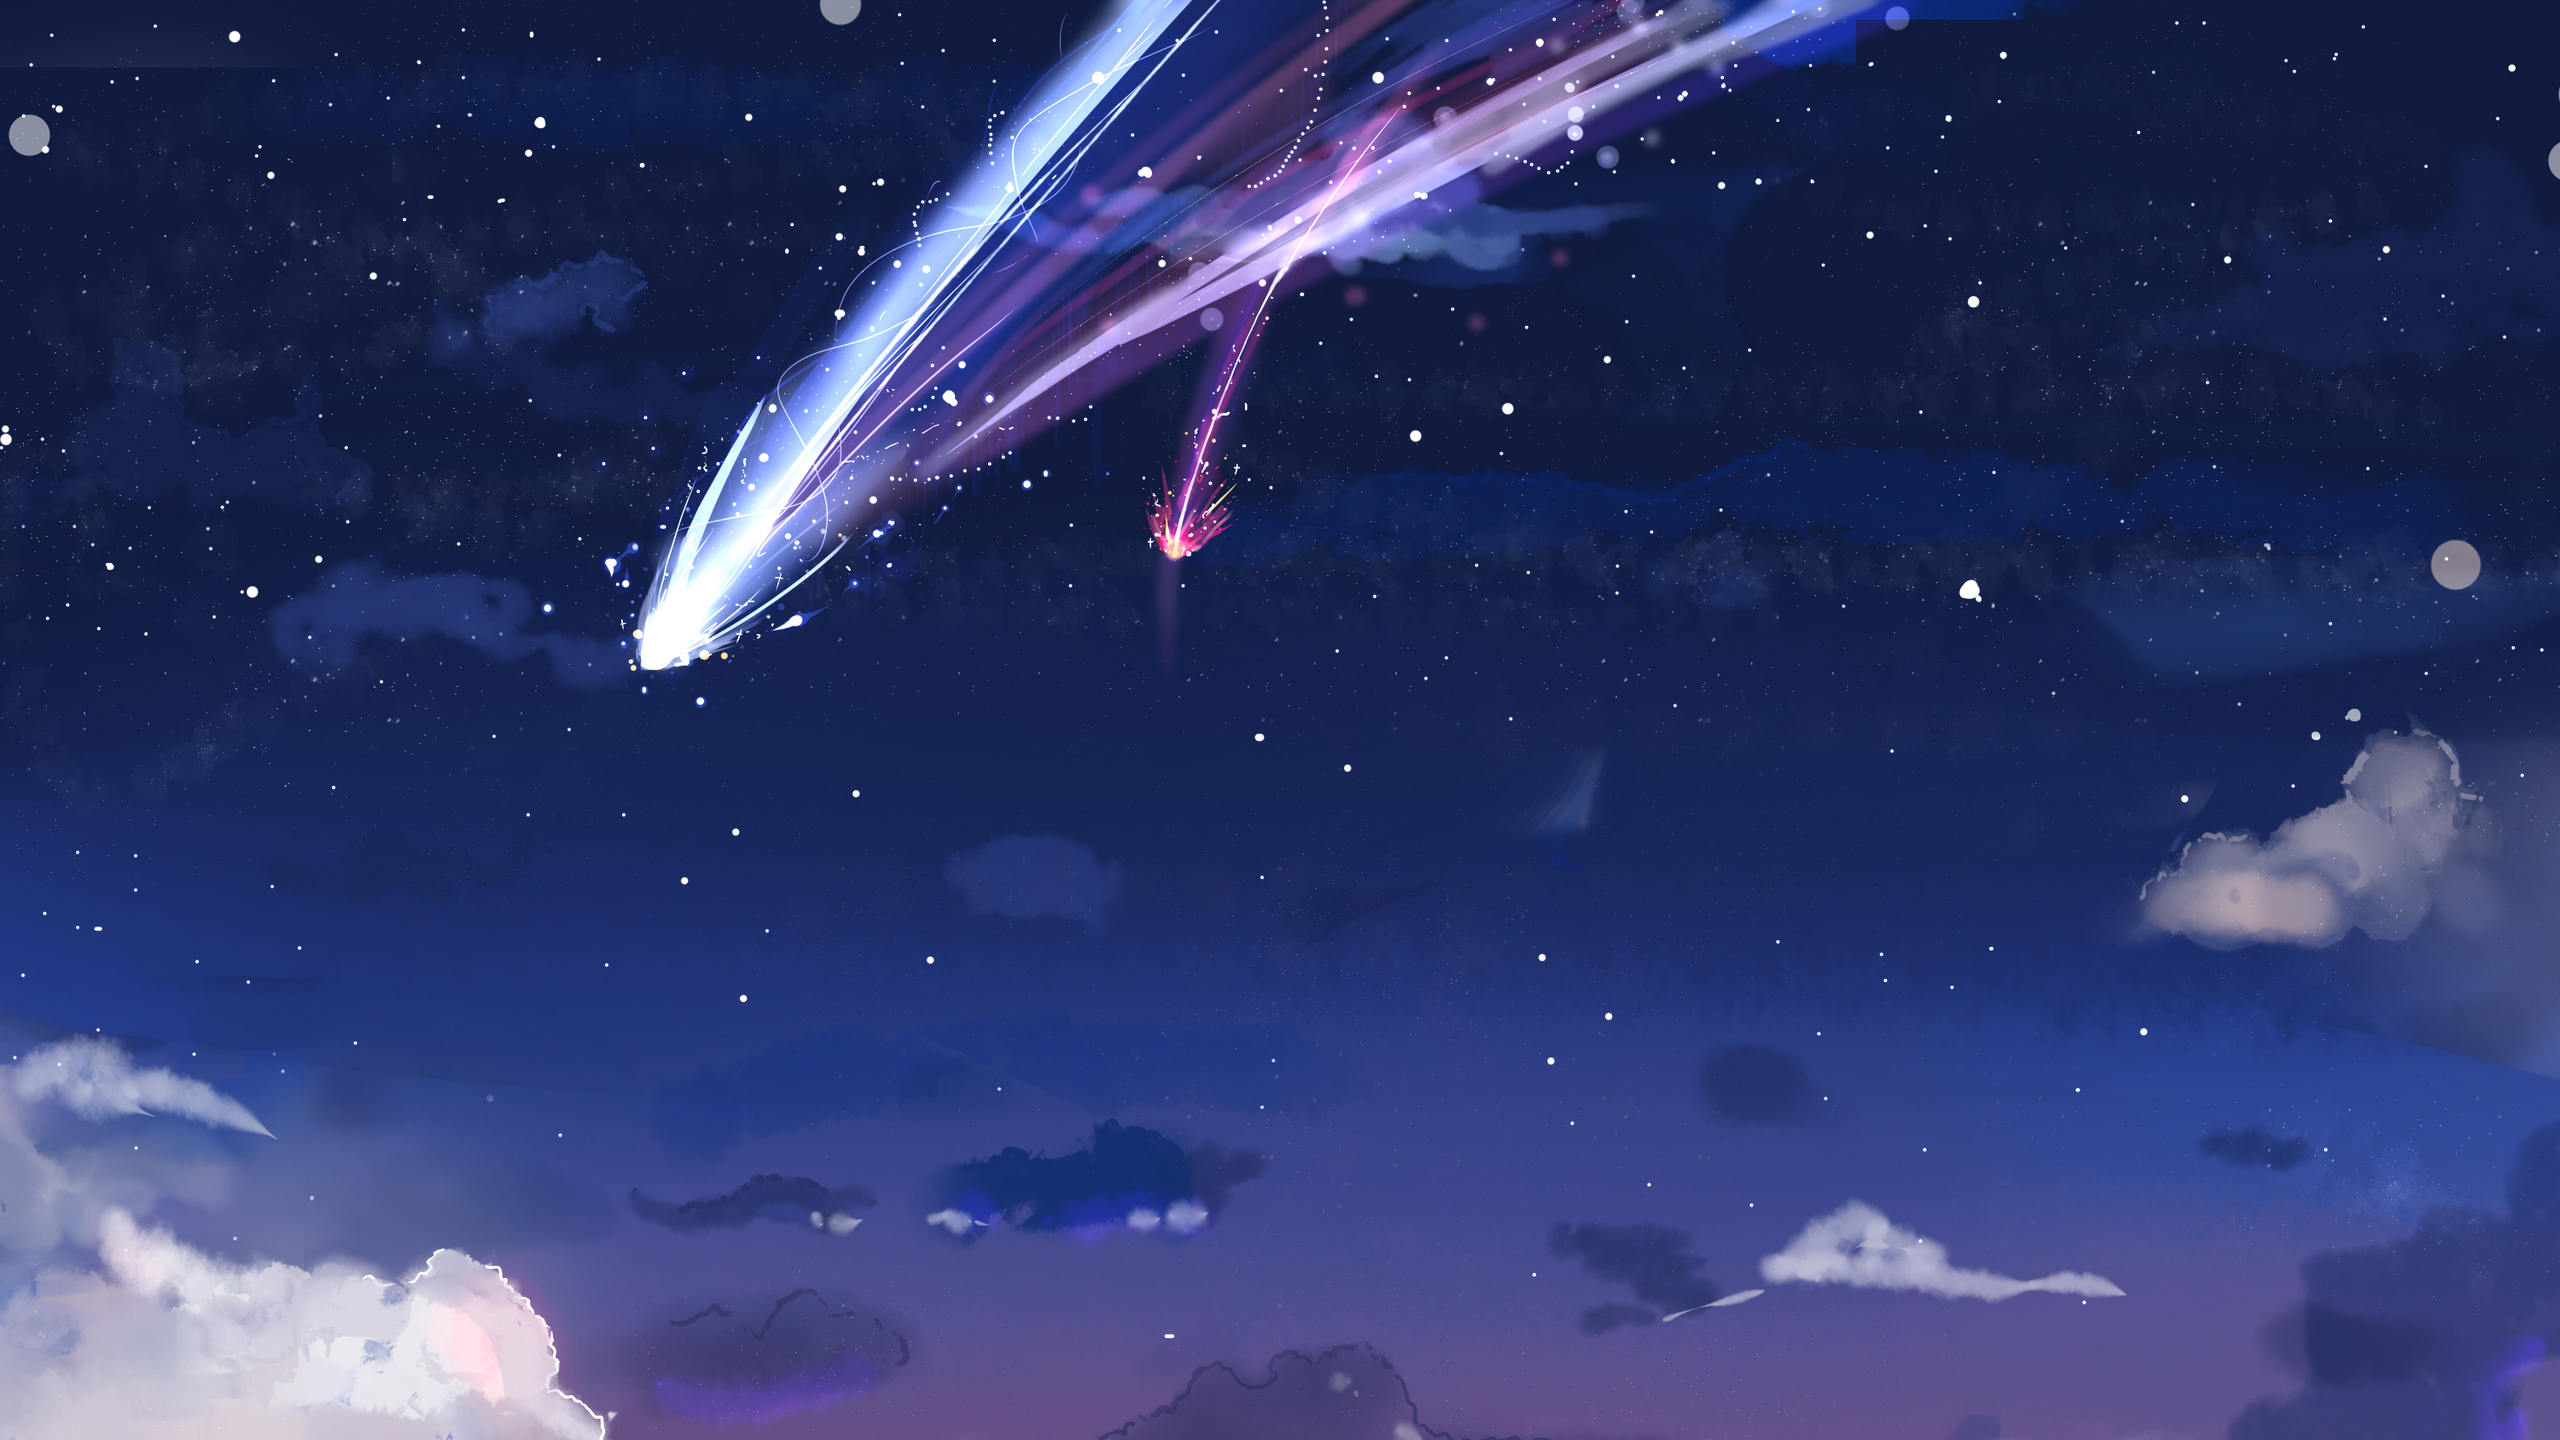  Your  Name  HD  Wallpaper  Background Image 2560x1440 